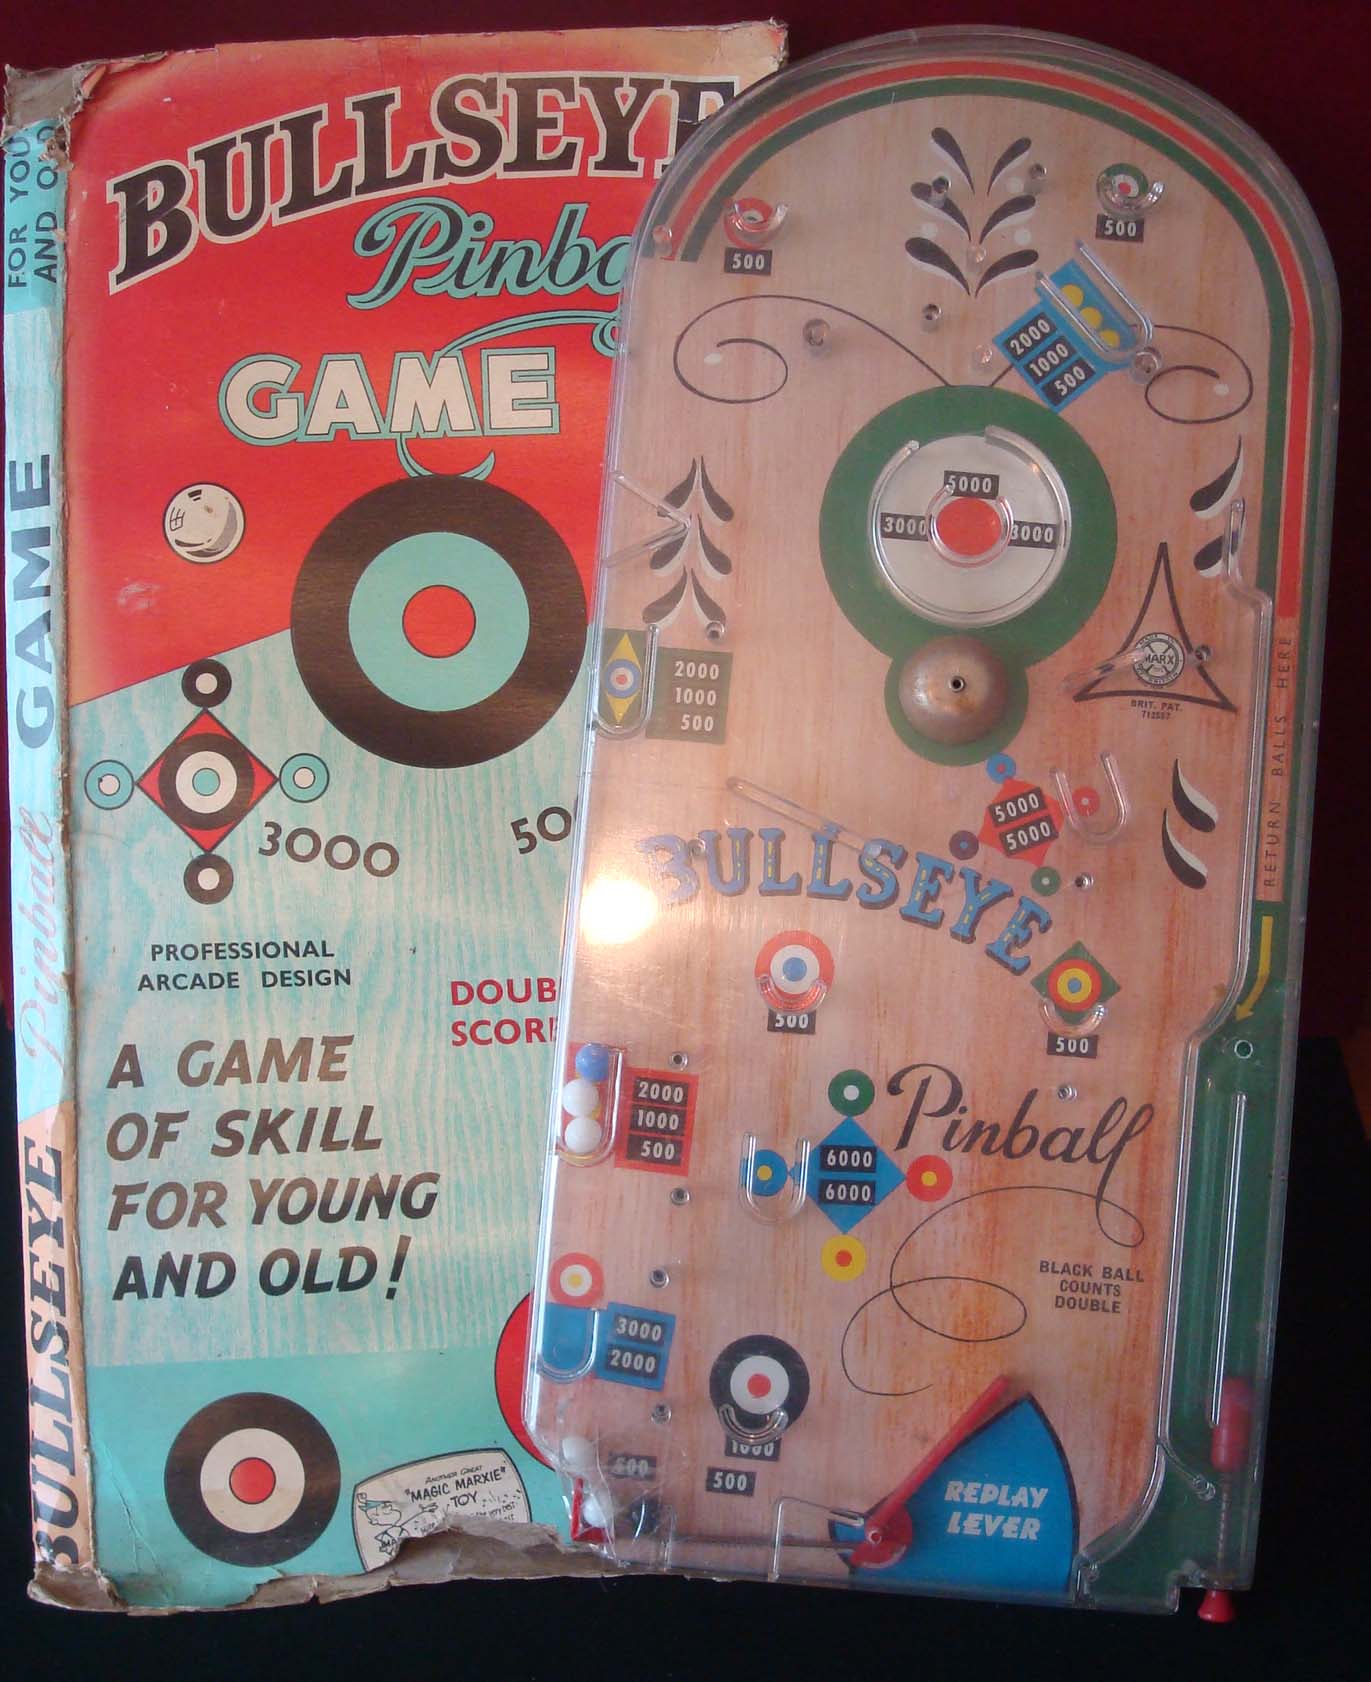 Marx Toys Bulls eye Pinball Game: A Game of skill for the young and old having original card